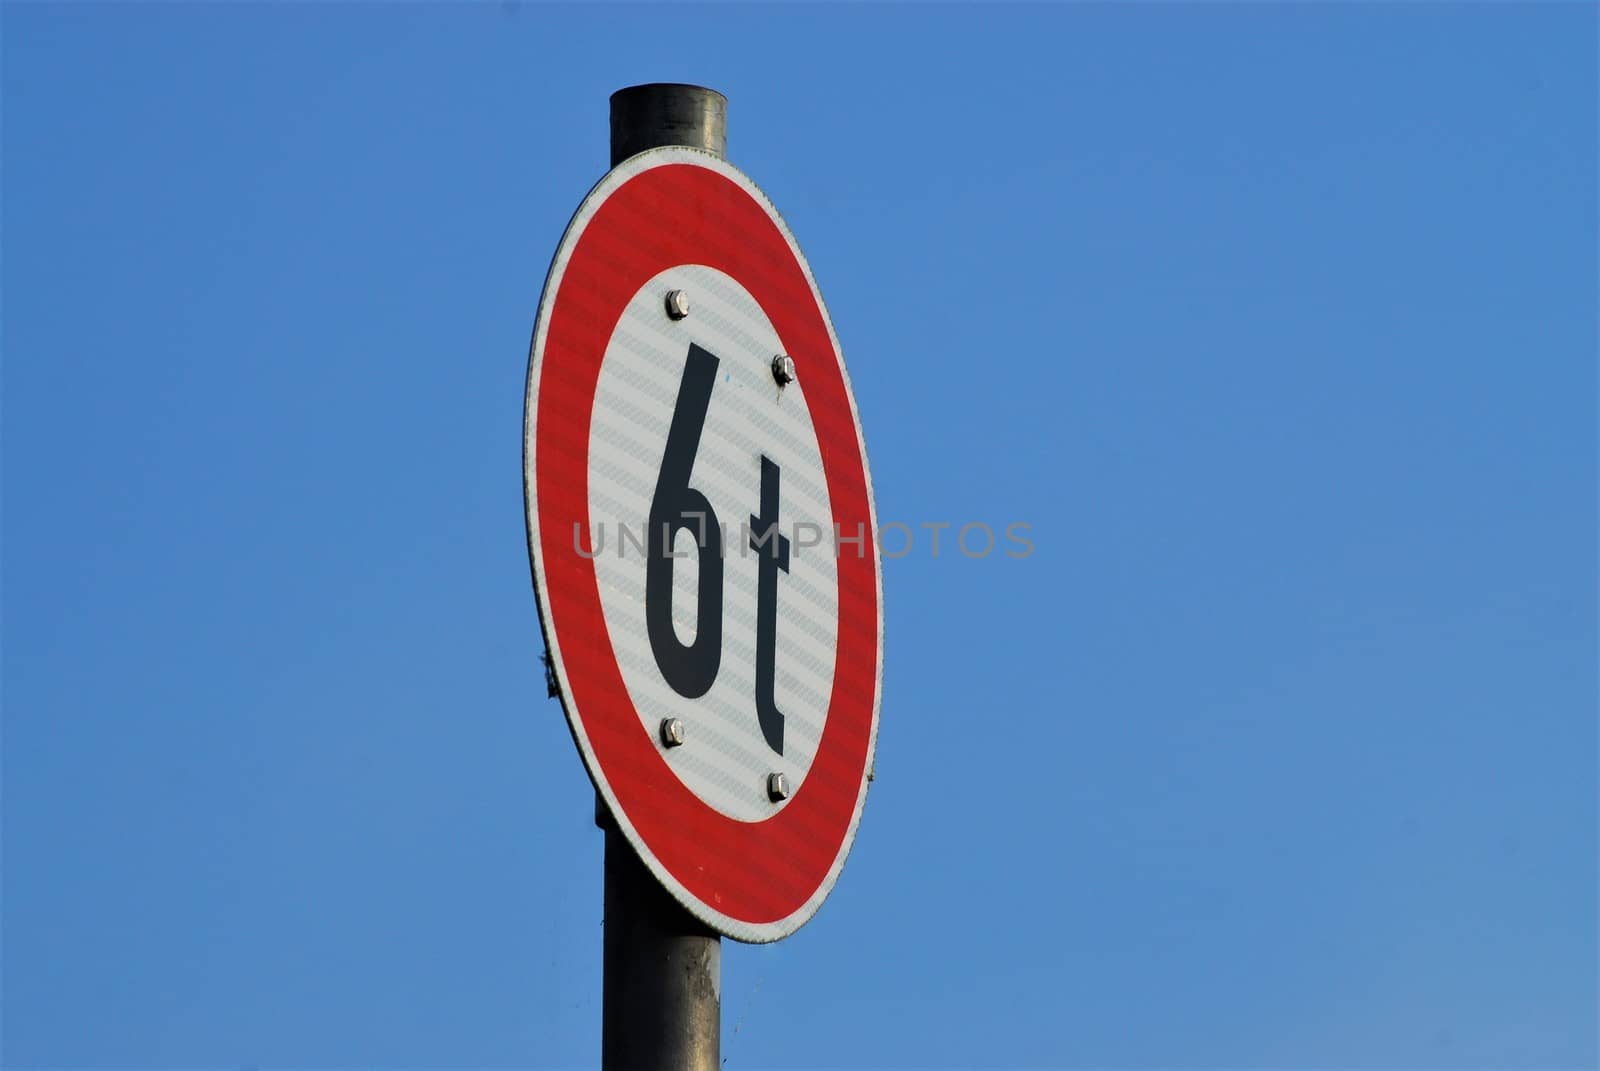 Traffic sign 6t white with red edge against a blue sky